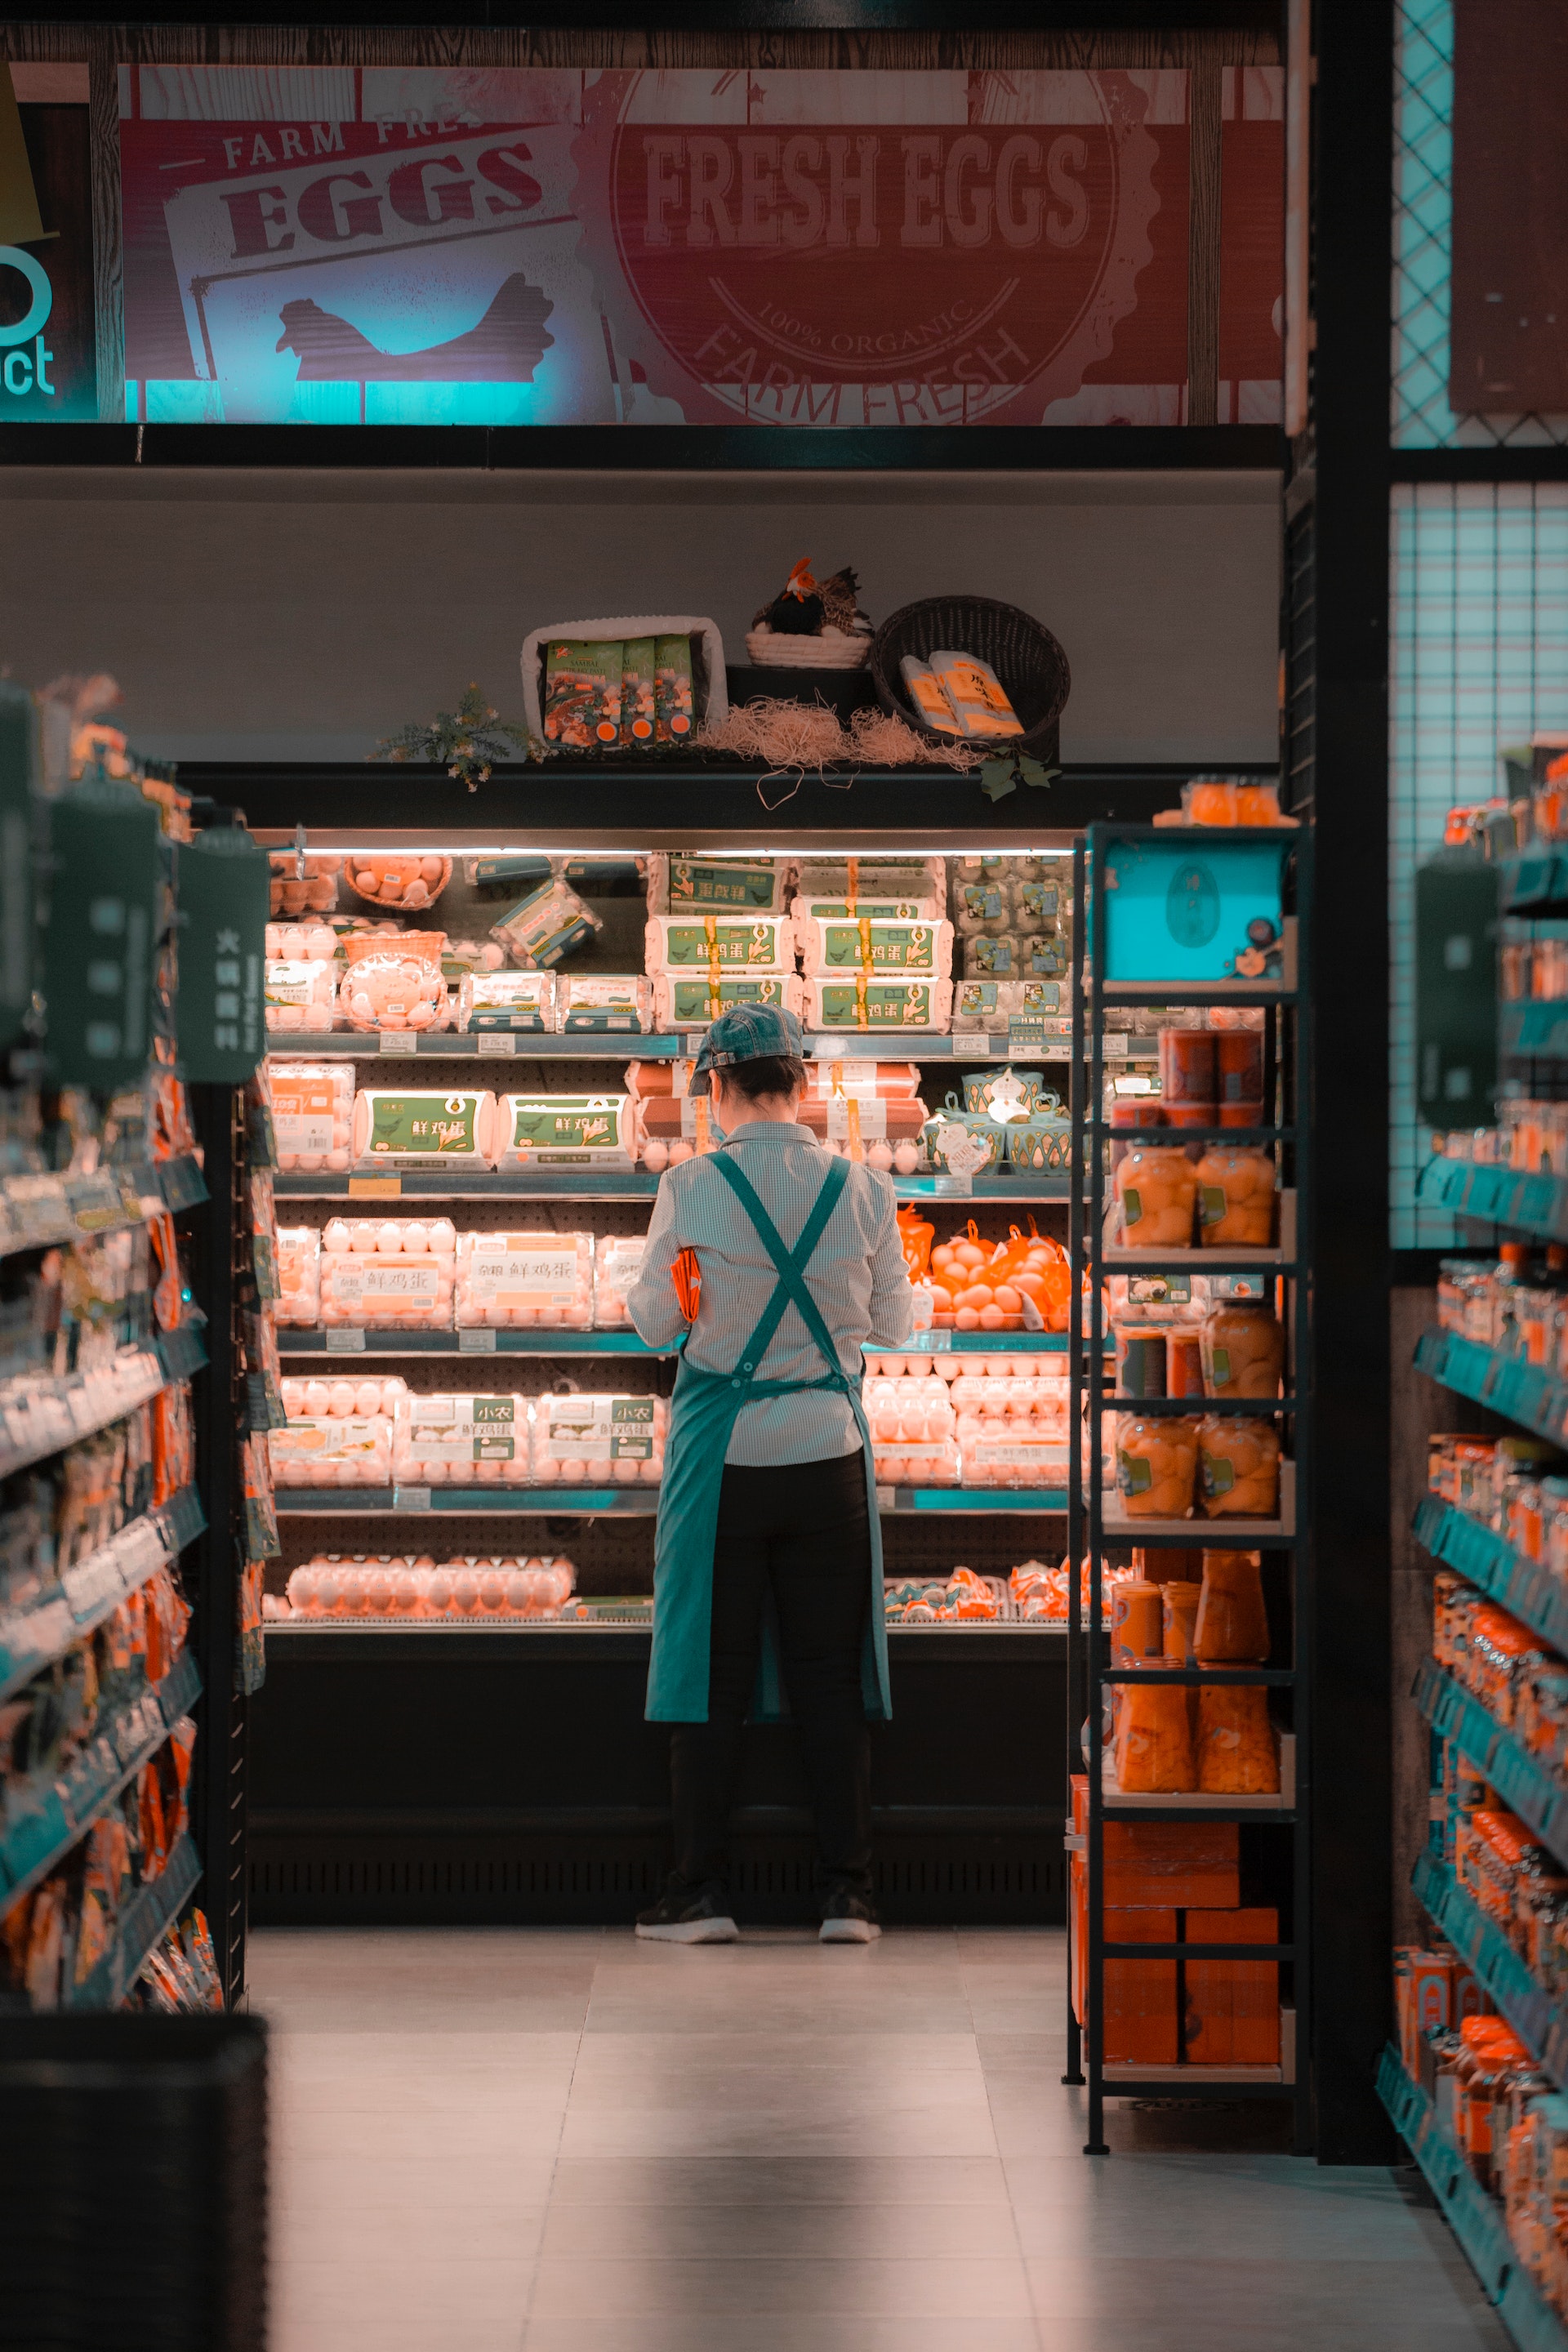 A supermarket employee standing near the refrigerator | Source: Pexels